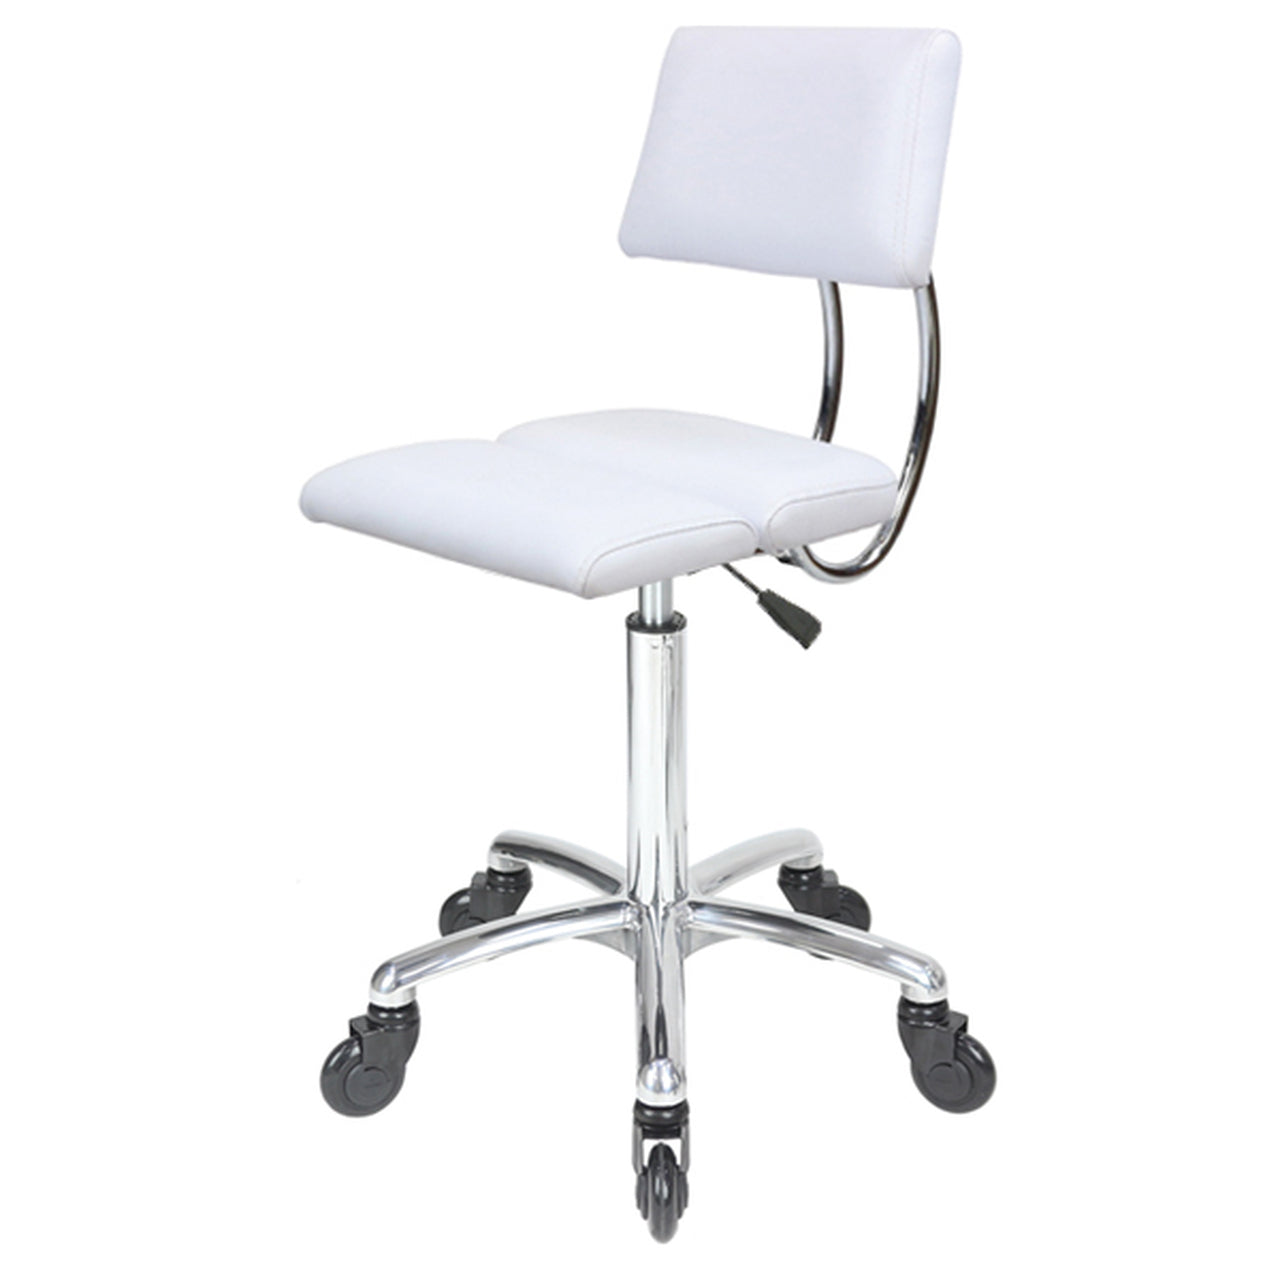 Joiken Dove Stool with Click'n Clean Castor Wheels white